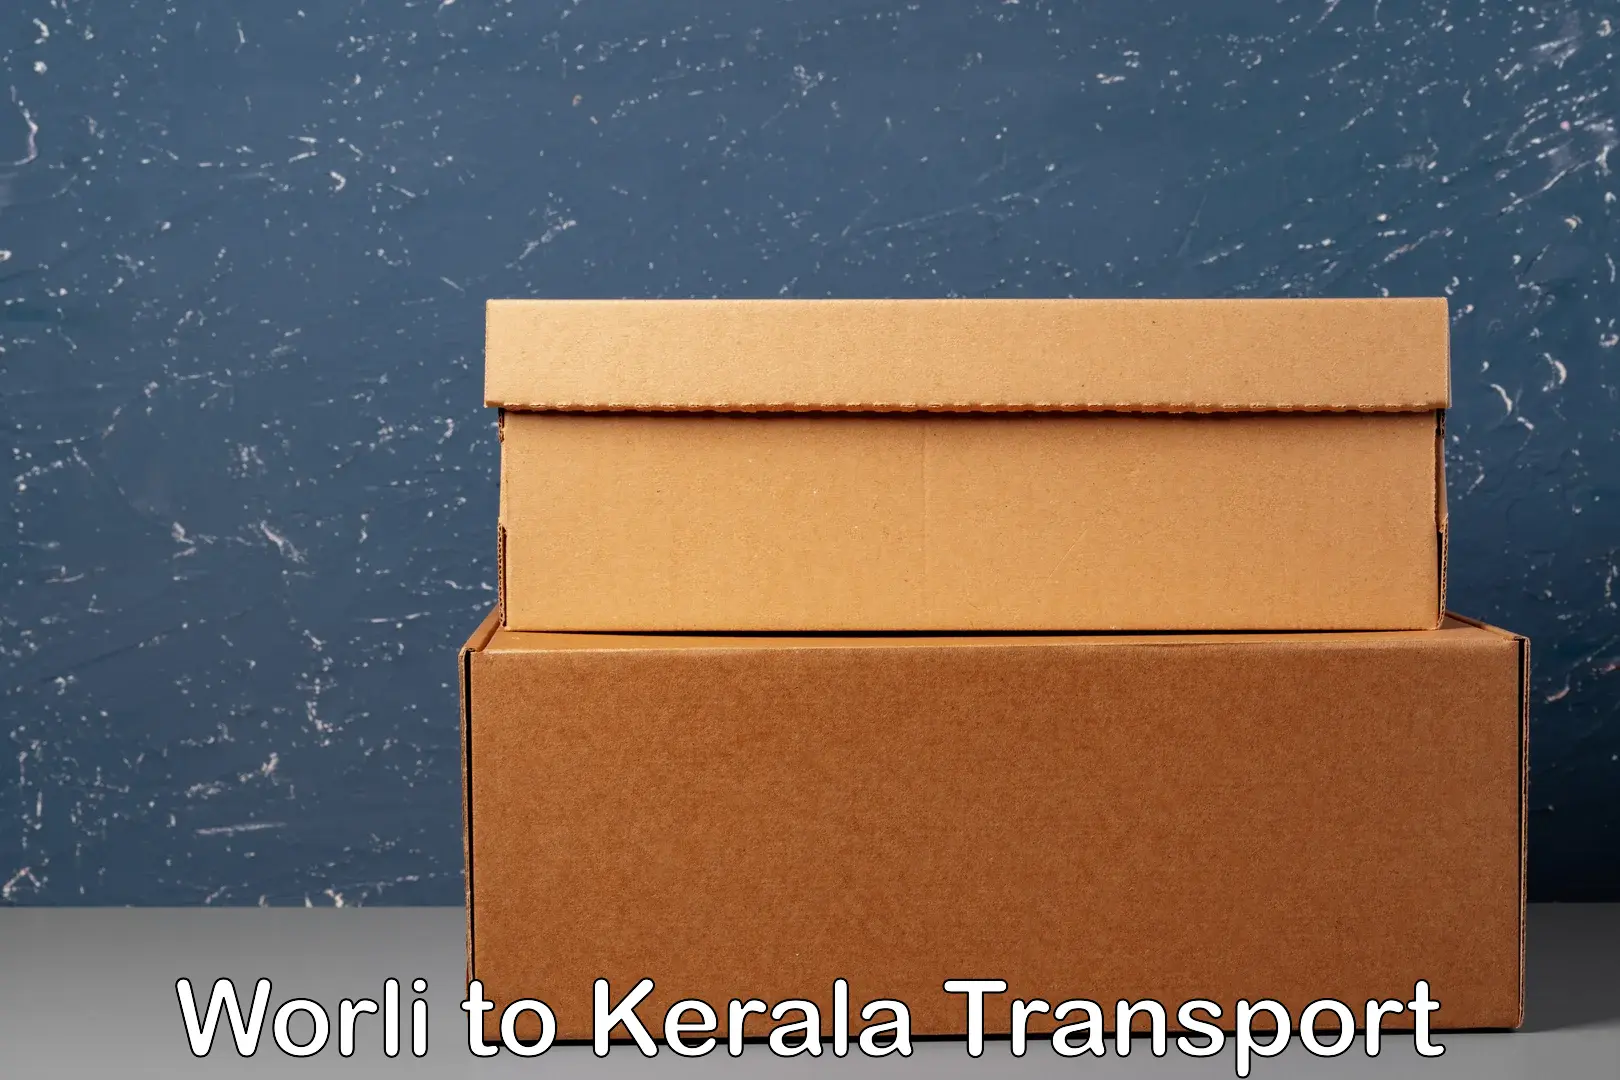 Scooty transport charges Worli to Kerala